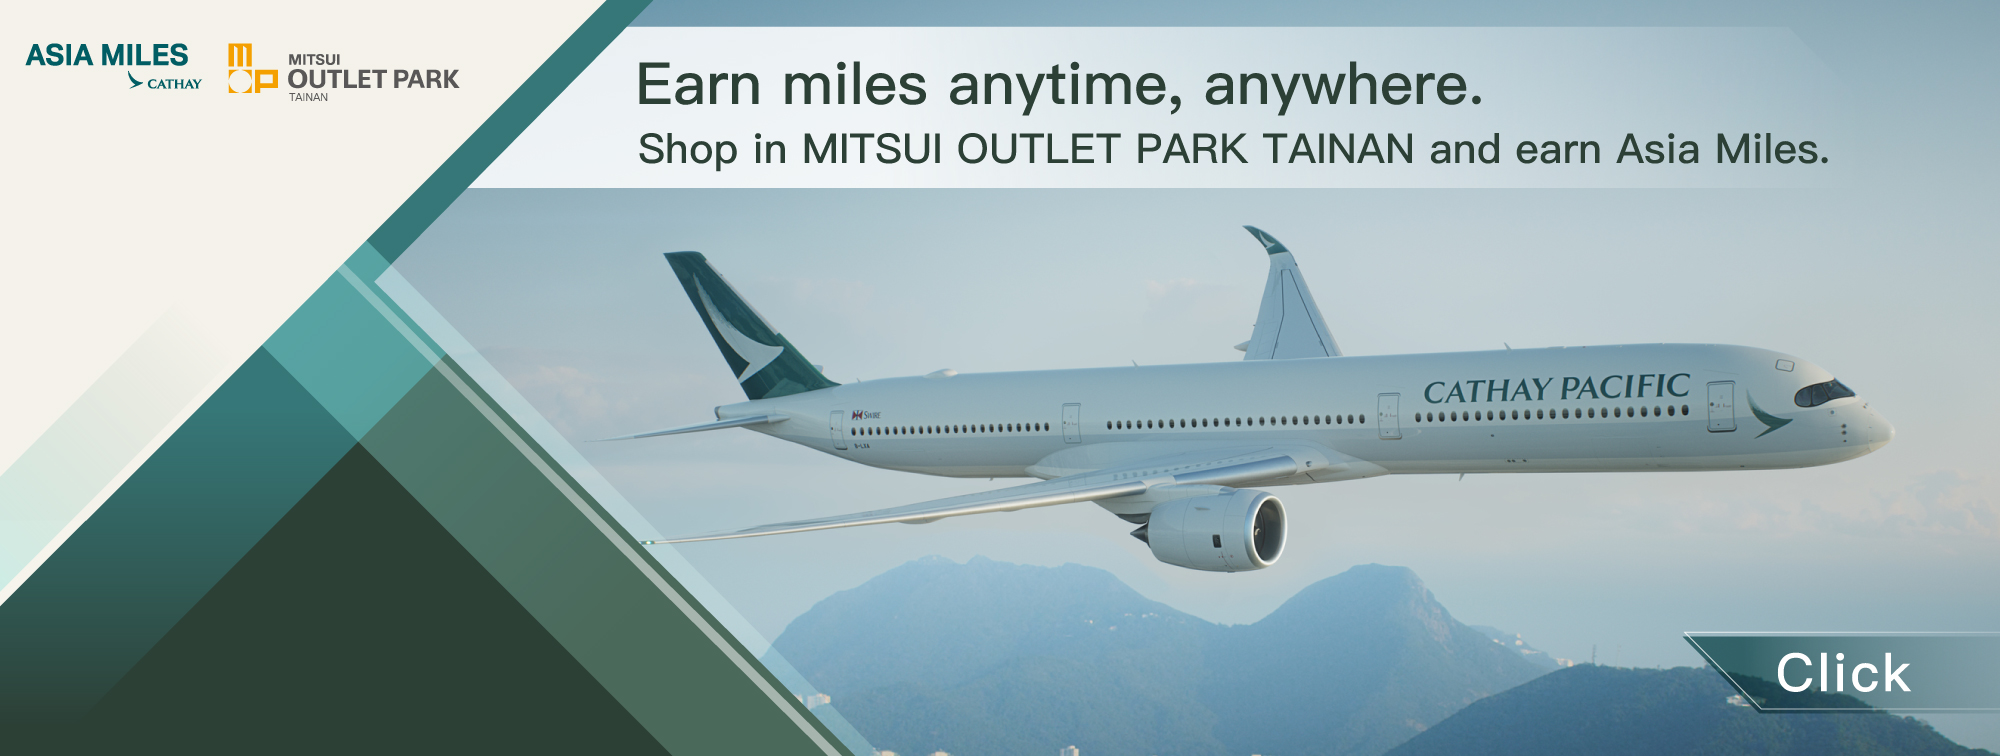 Earn miles anytime, anywhere.